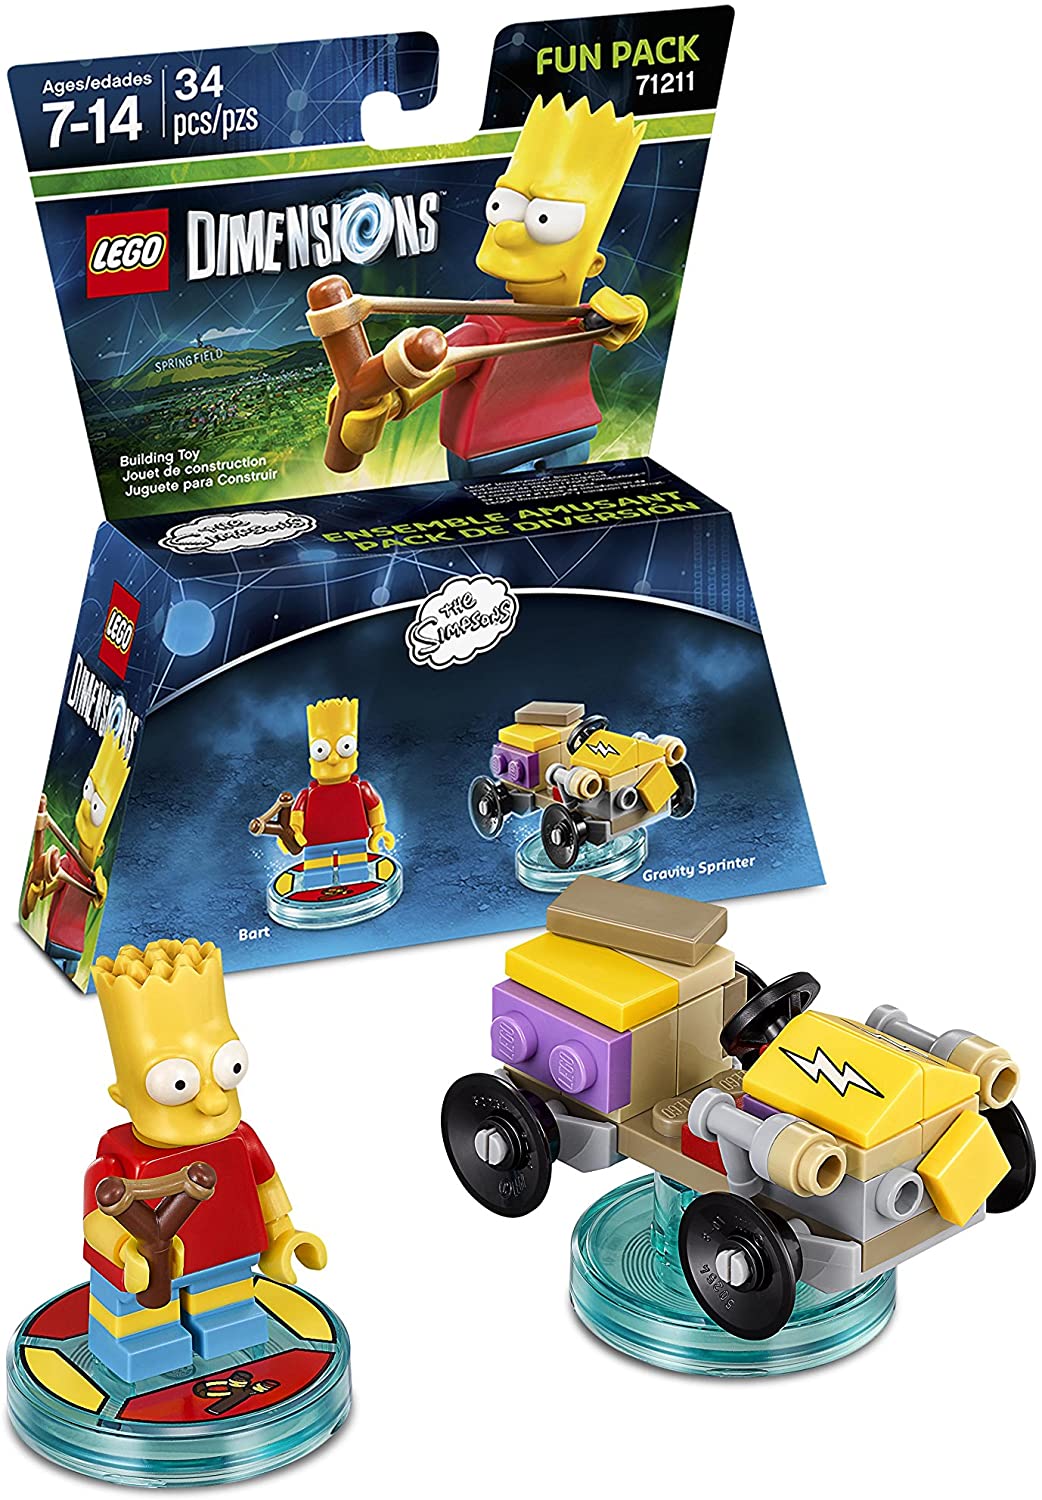 LEGO Dimensions - Fun Pack (71211) - The Simpsons (Bart, Gravity Sprinter)